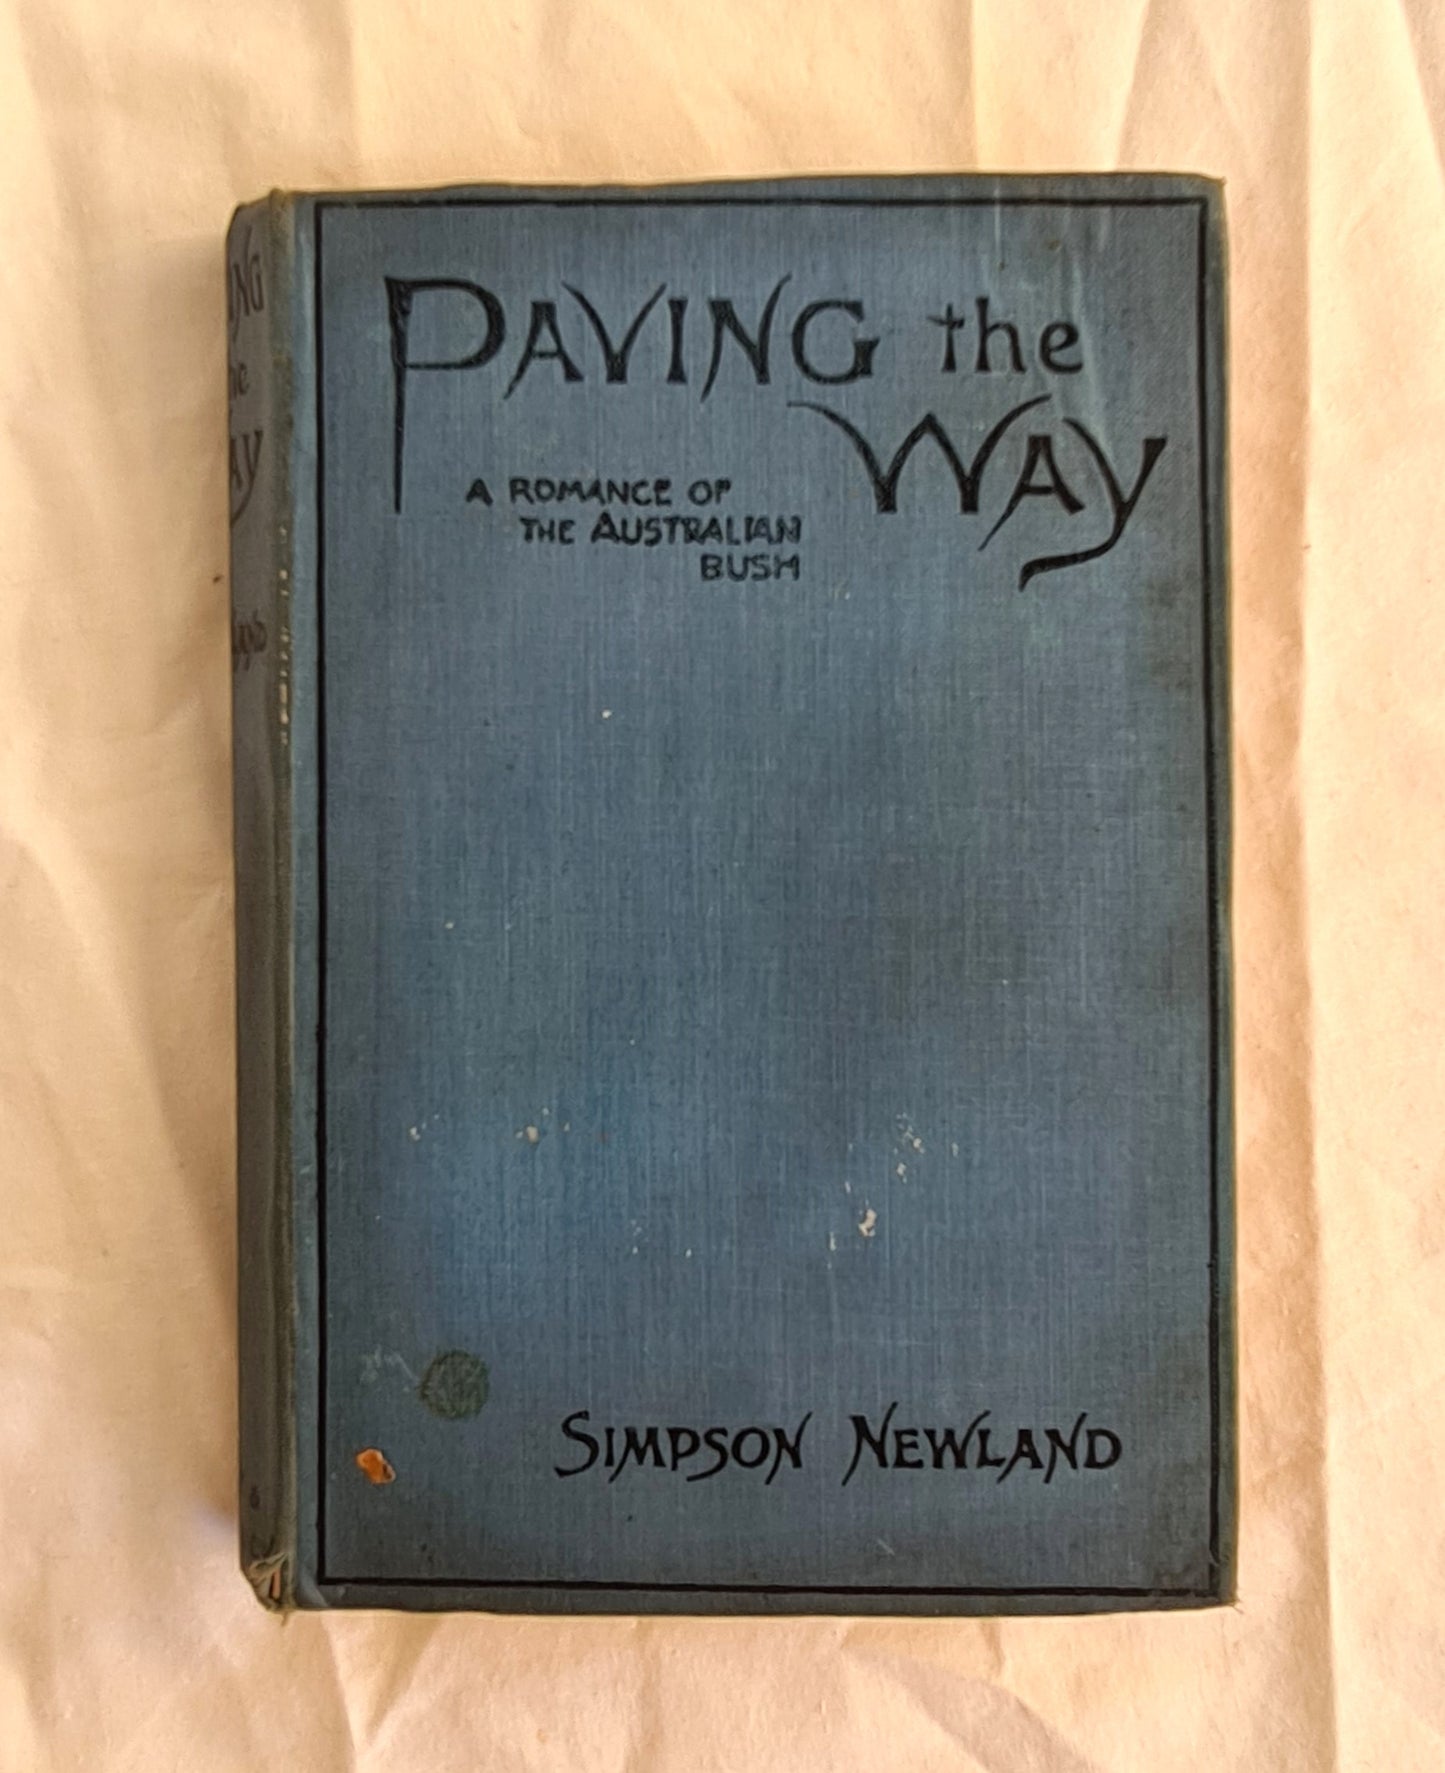 Paving the Way by Simpson Newland (1912)